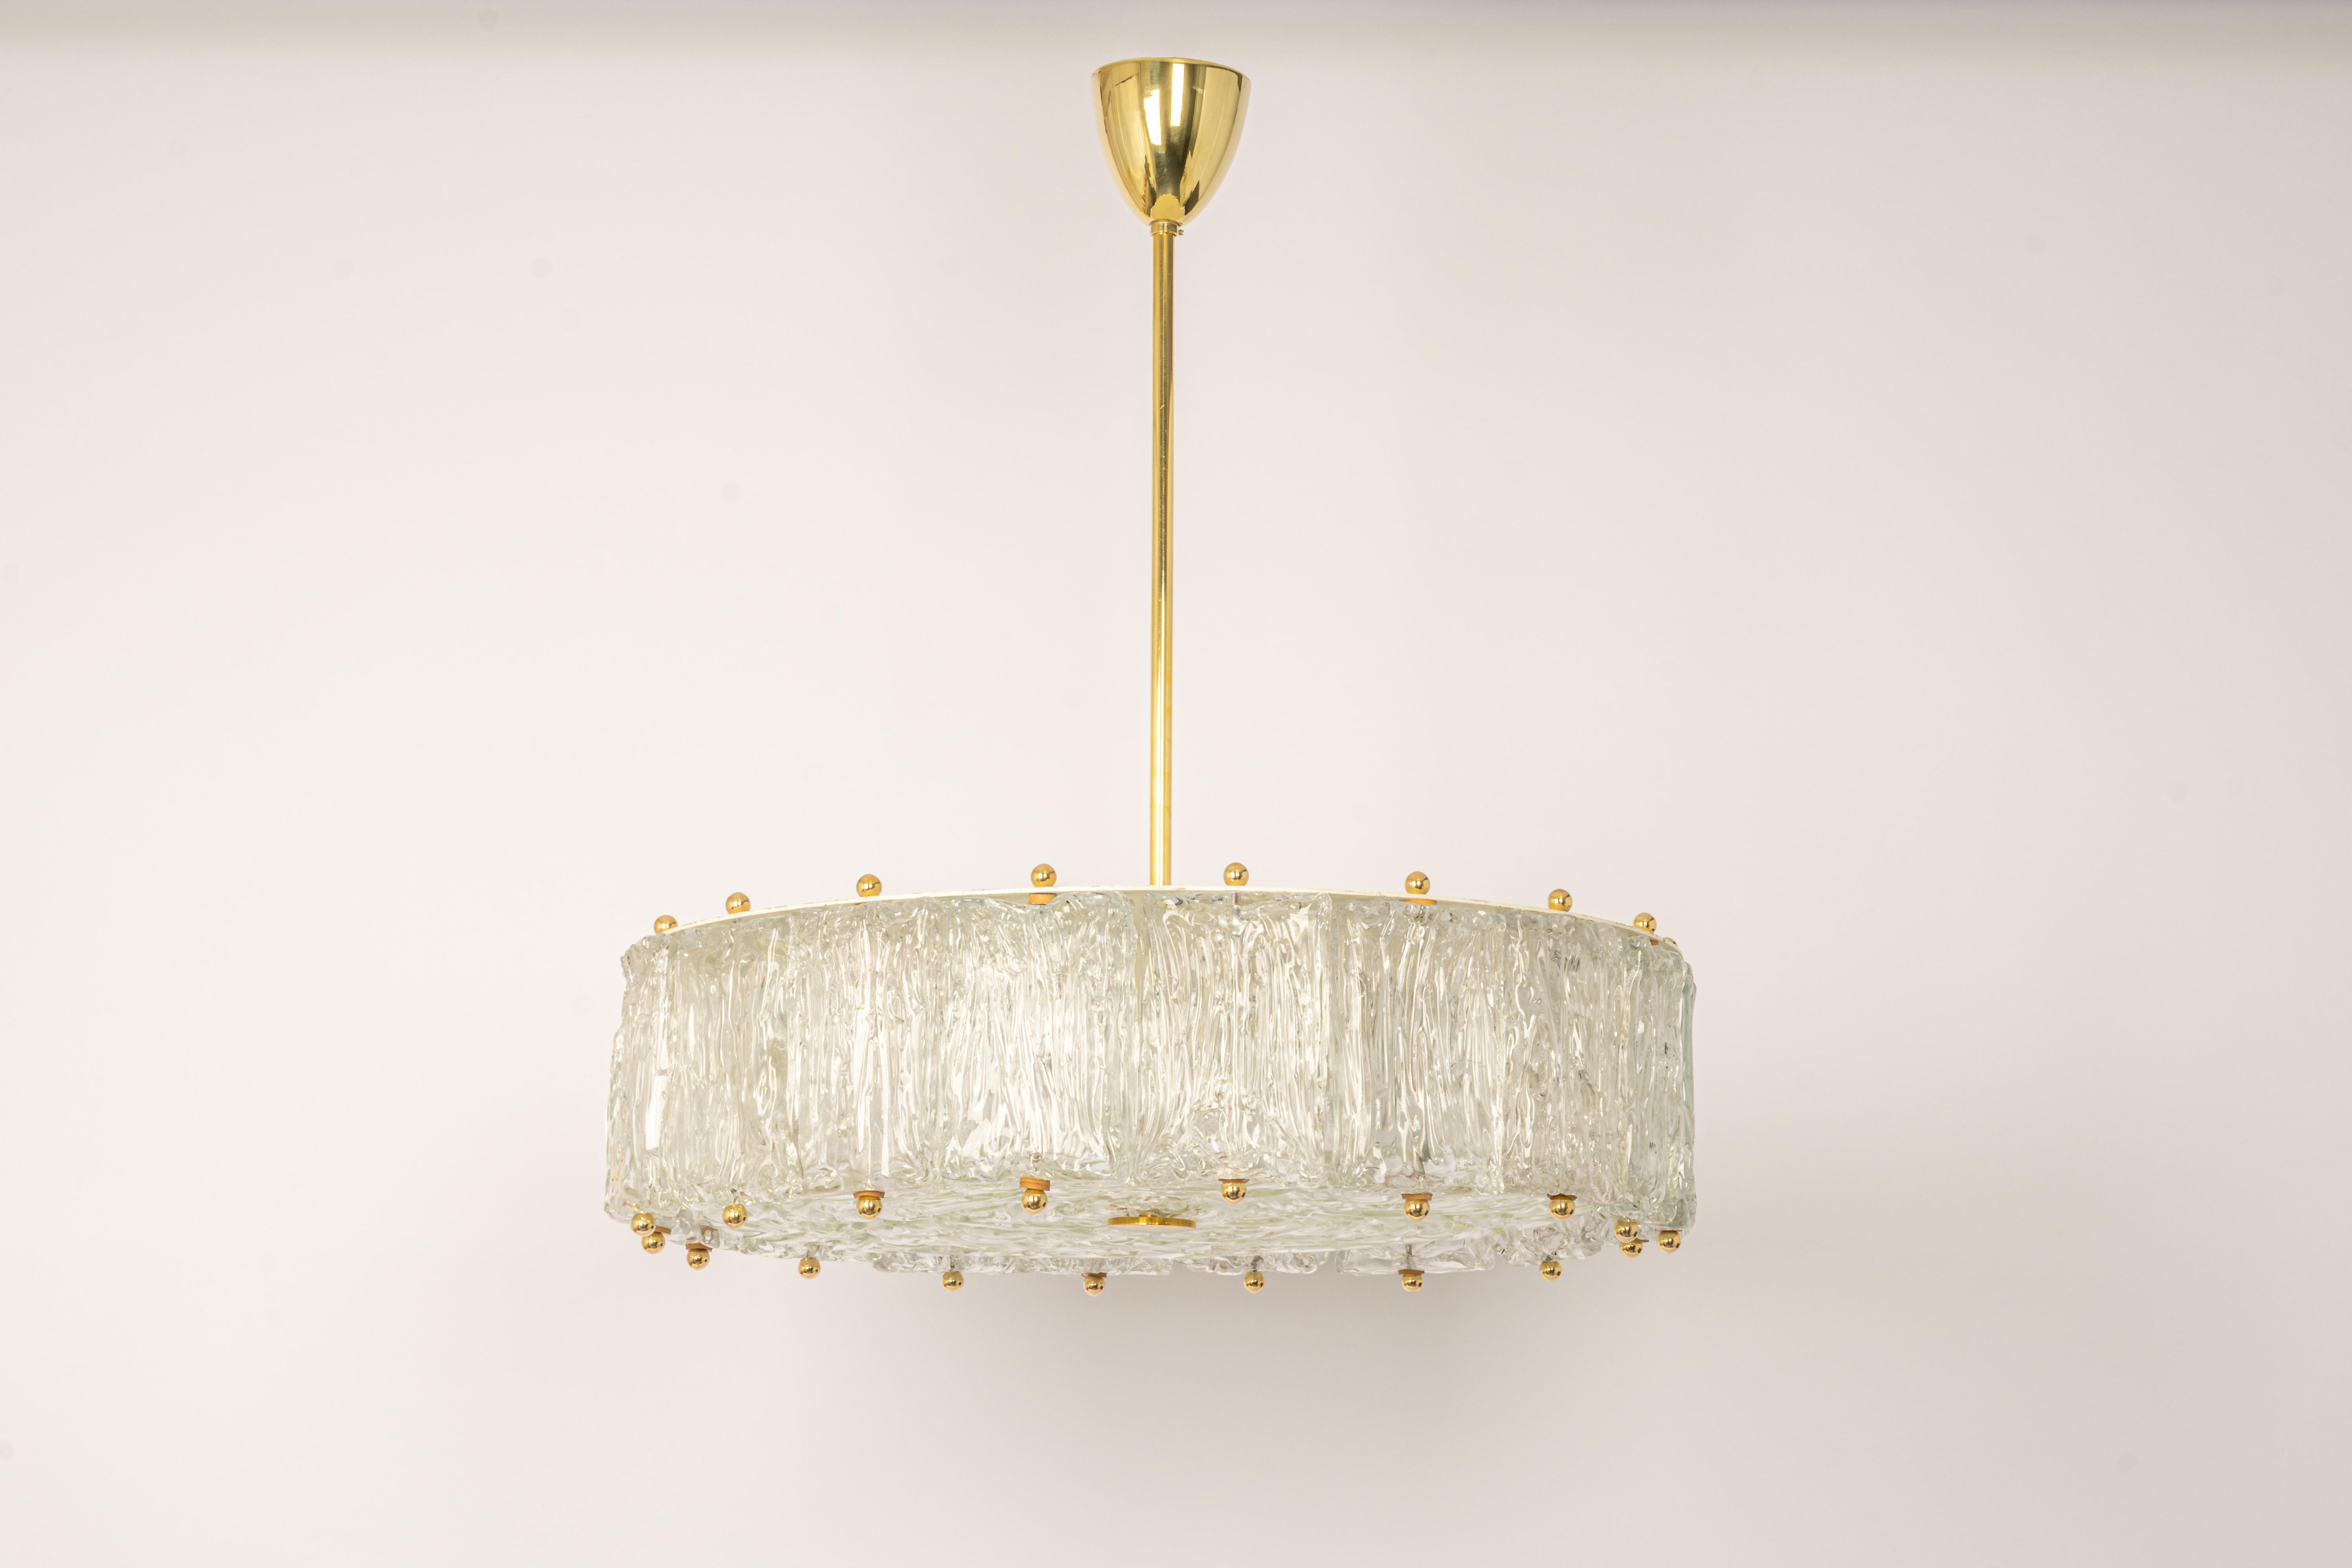 Mid-Century Murano glass chandelier by Barovier & Toso, Italy, 1960s
Very good condition.

High quality and in very good condition. Cleaned, well-wired, and ready to use.

The fixture requires 12 x E14 standard bulbs with 40W max each
Light